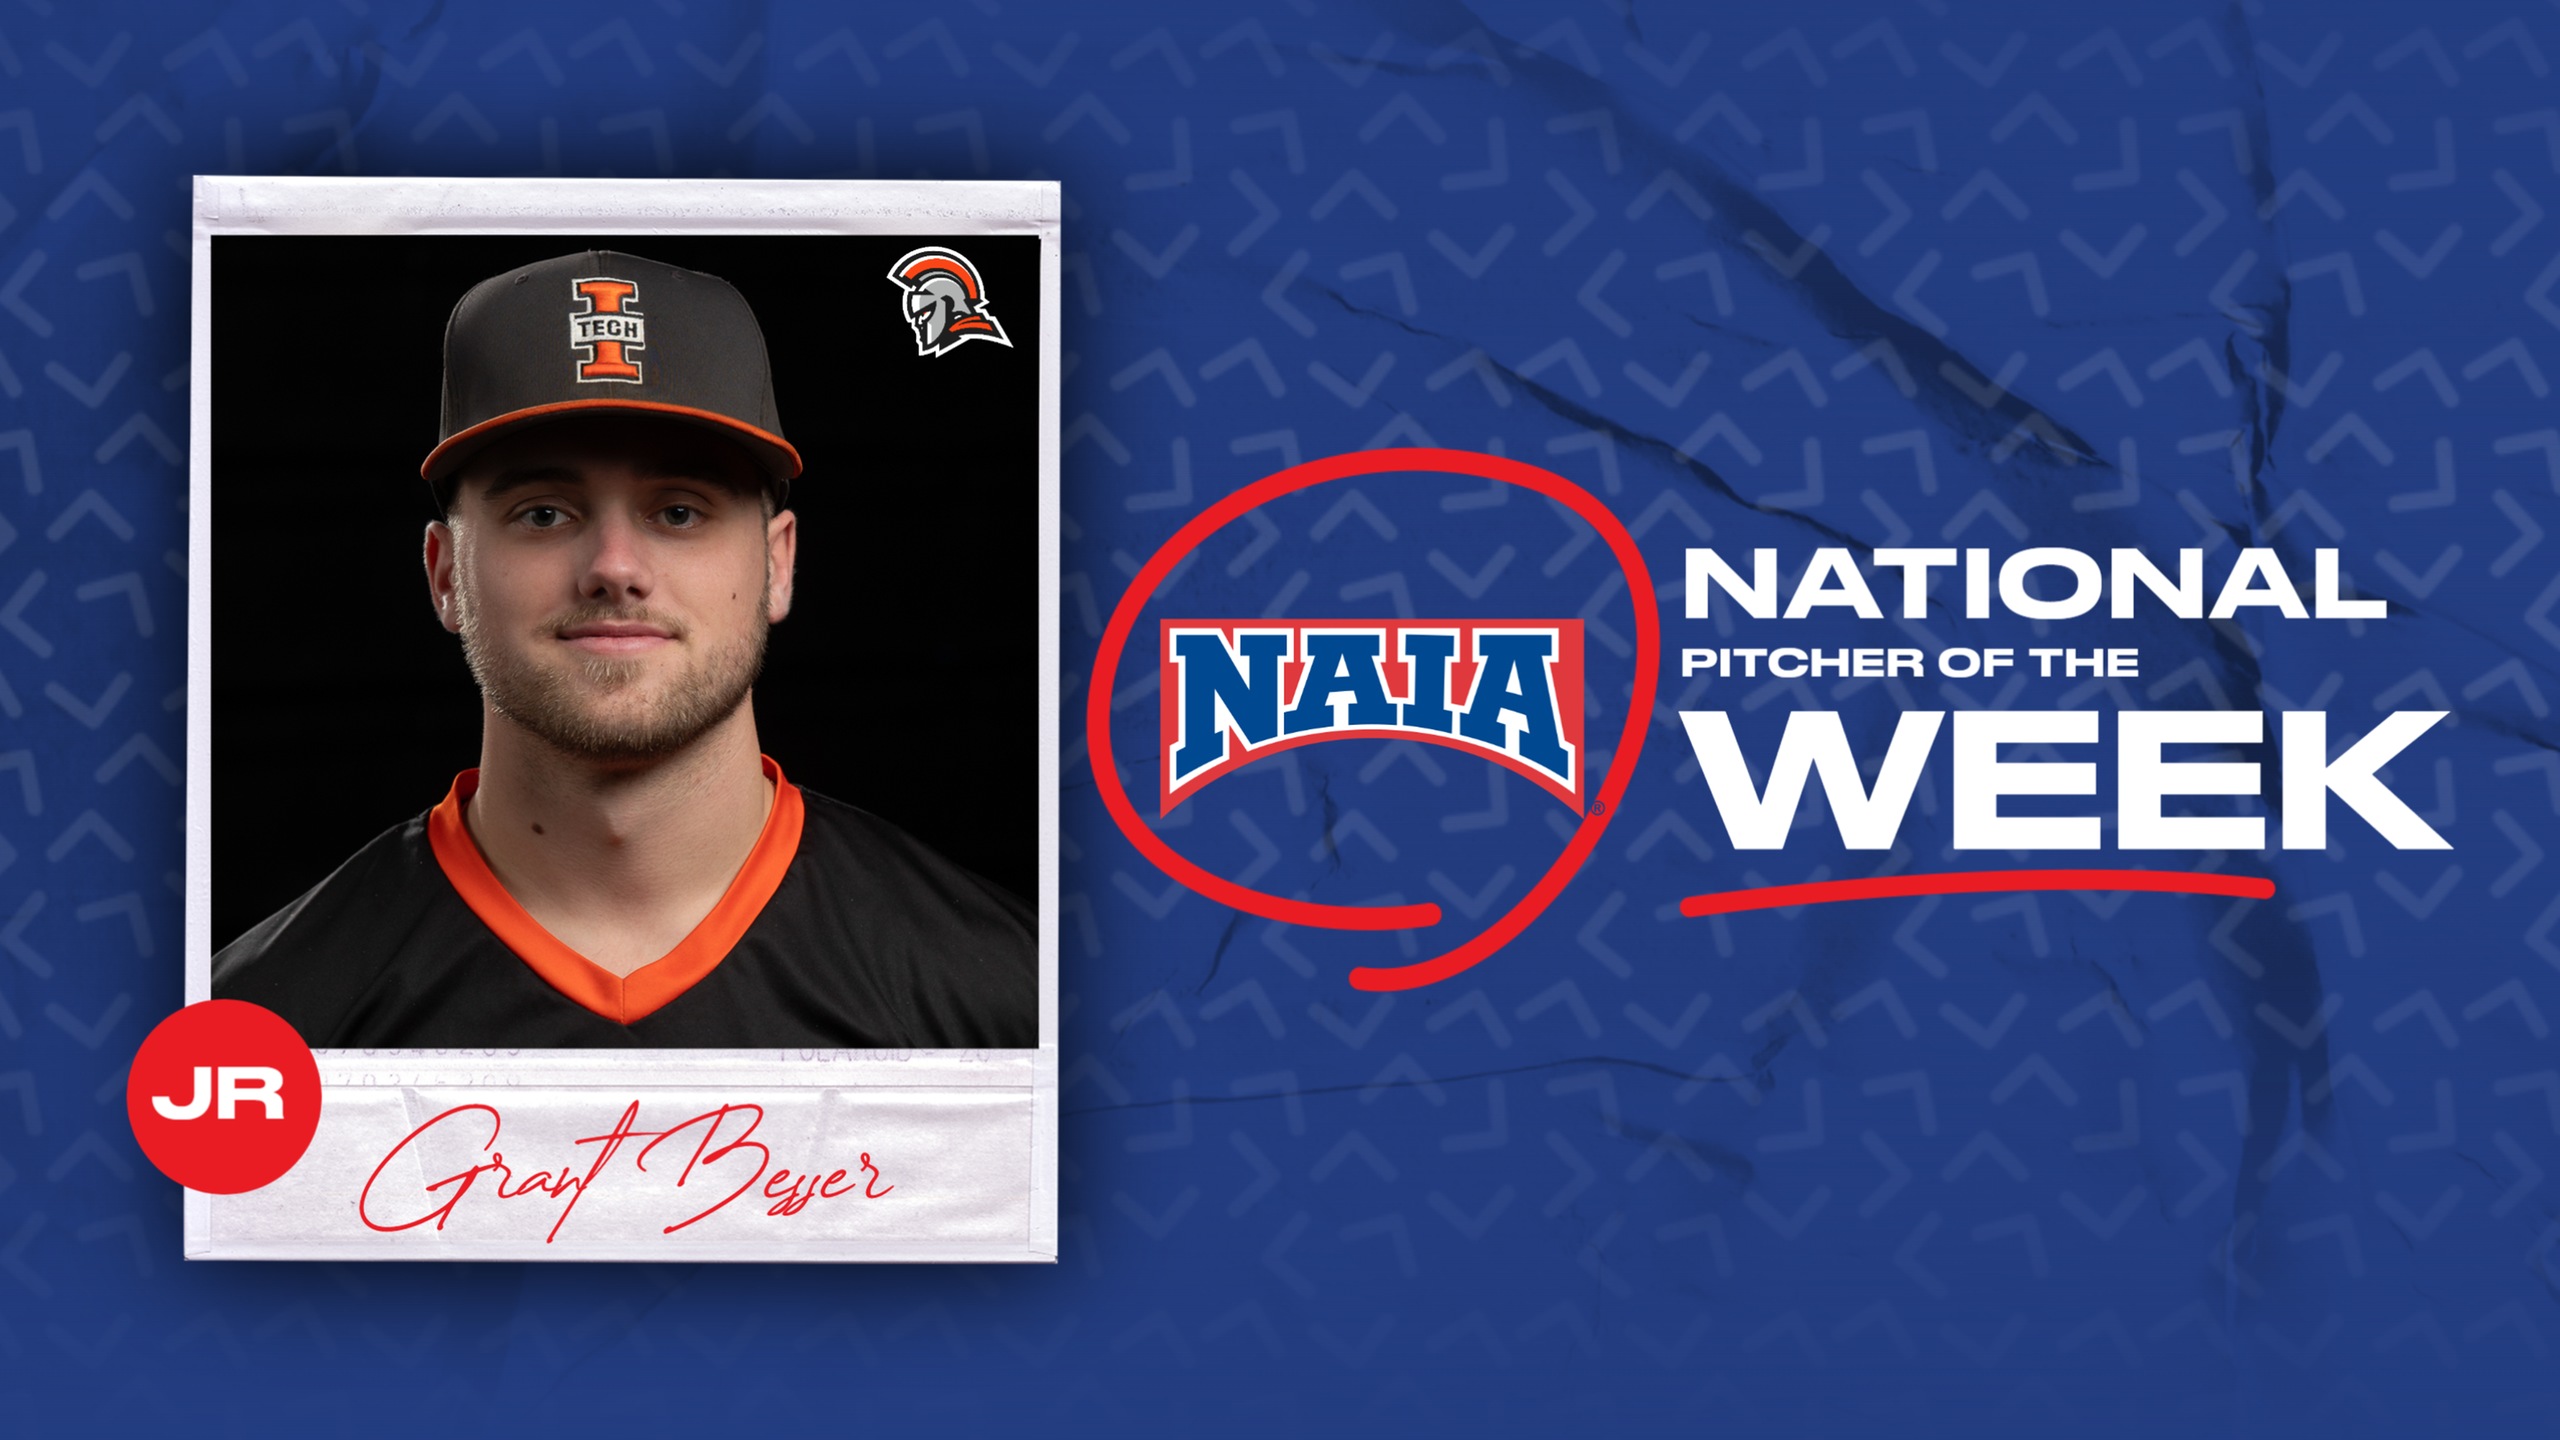 Indiana Tech's Besser Named NAIA Pitcher of the Week